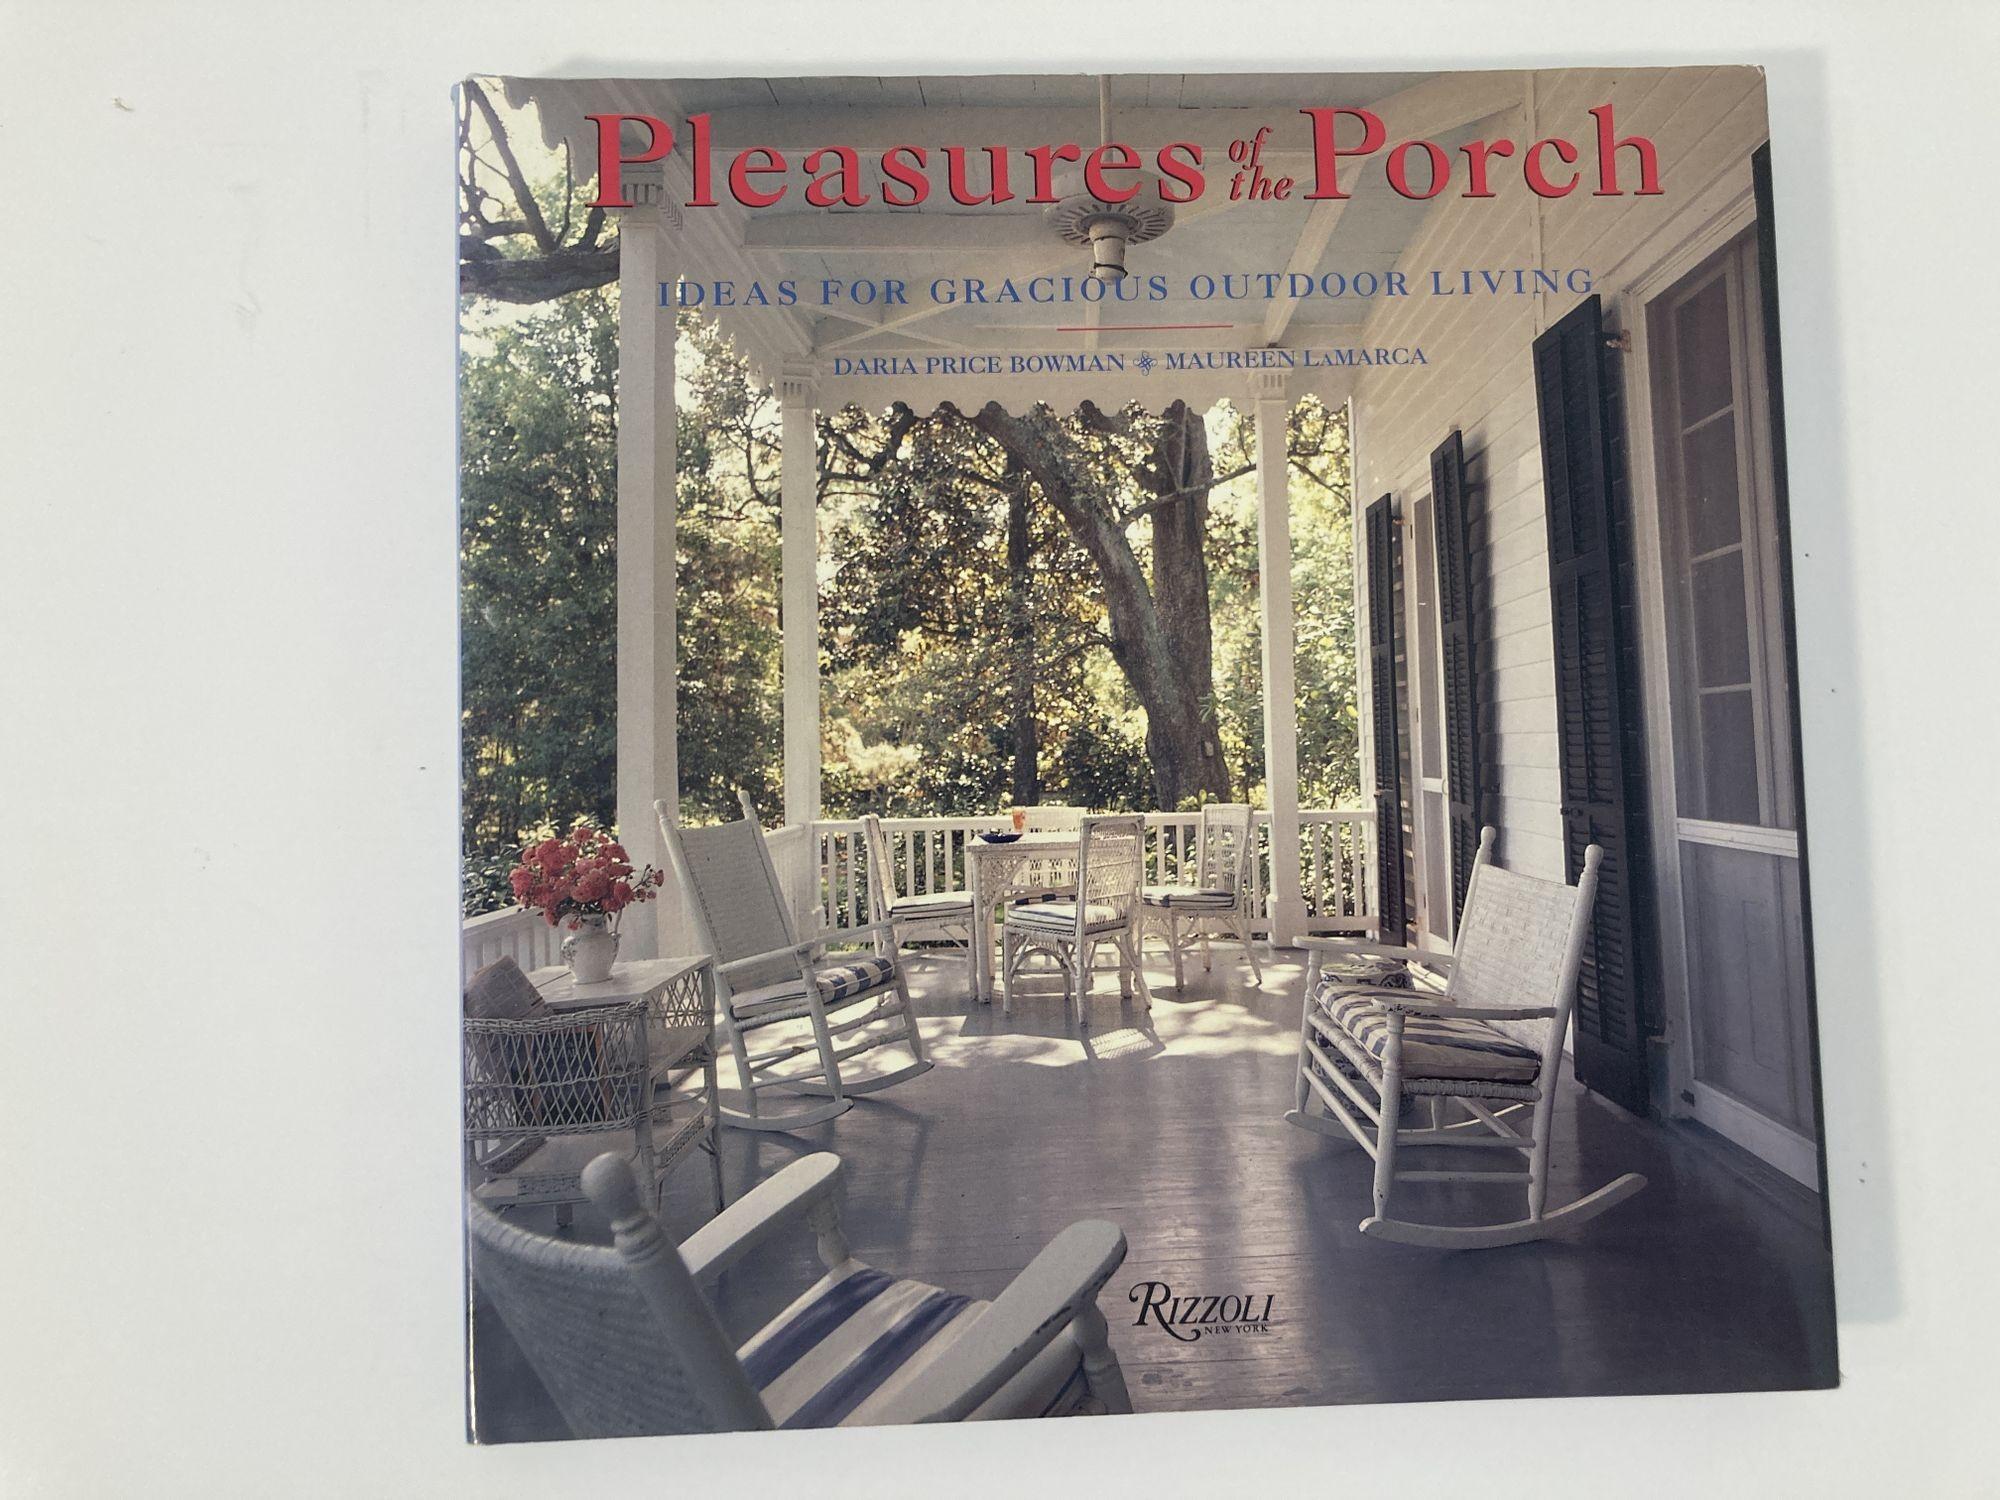 Pleasures of the Porch by Daria Price Bowman & Maureen LaMarca First Edition.
New York: Rizzoli, 1997. First edition hardcover with dust jacket. 144 pp.
Idea book for making the perfect porch no matter the style or location.
Includes ideas for